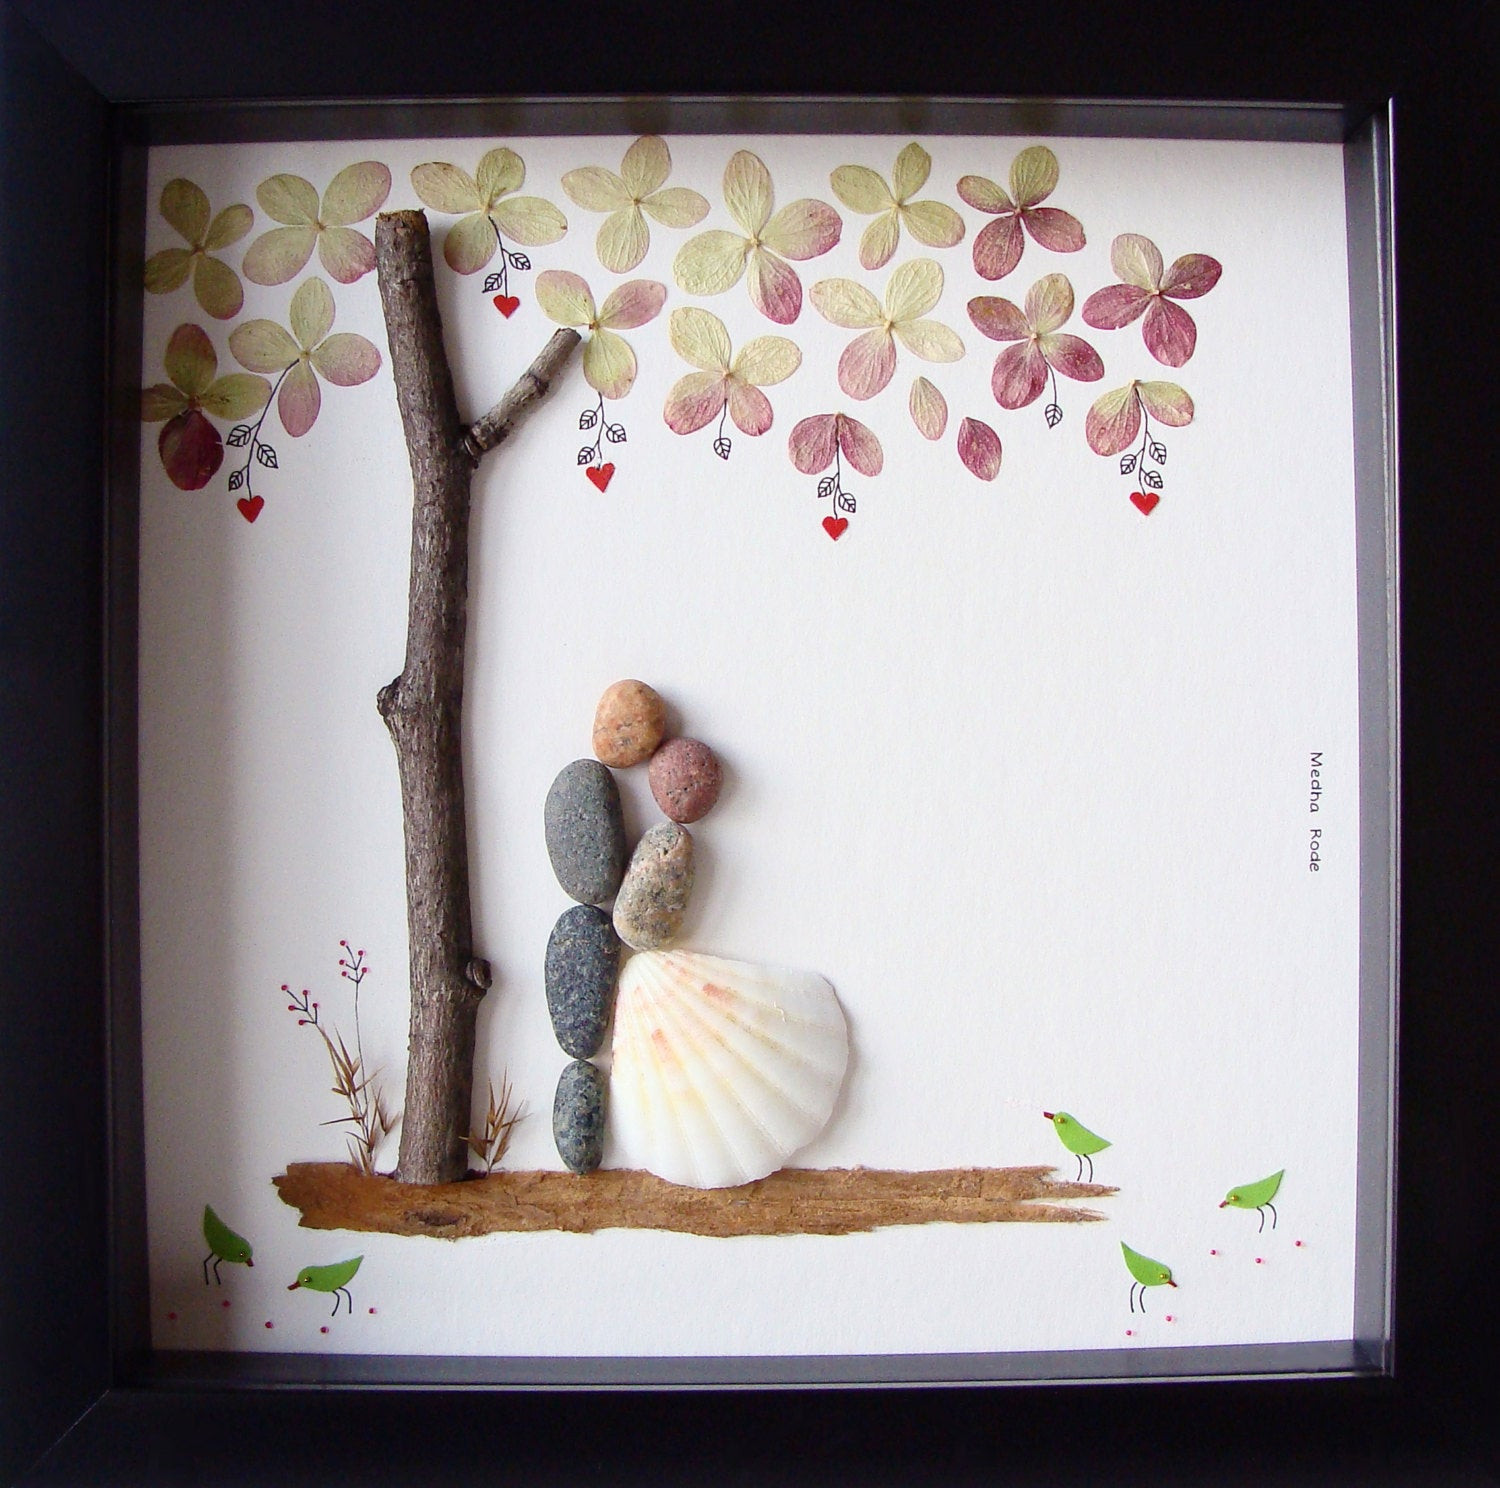 Gift Ideas For A Married Couple
 Unique Wedding Gift For Couple Wedding Pebble Art by MedhaRode